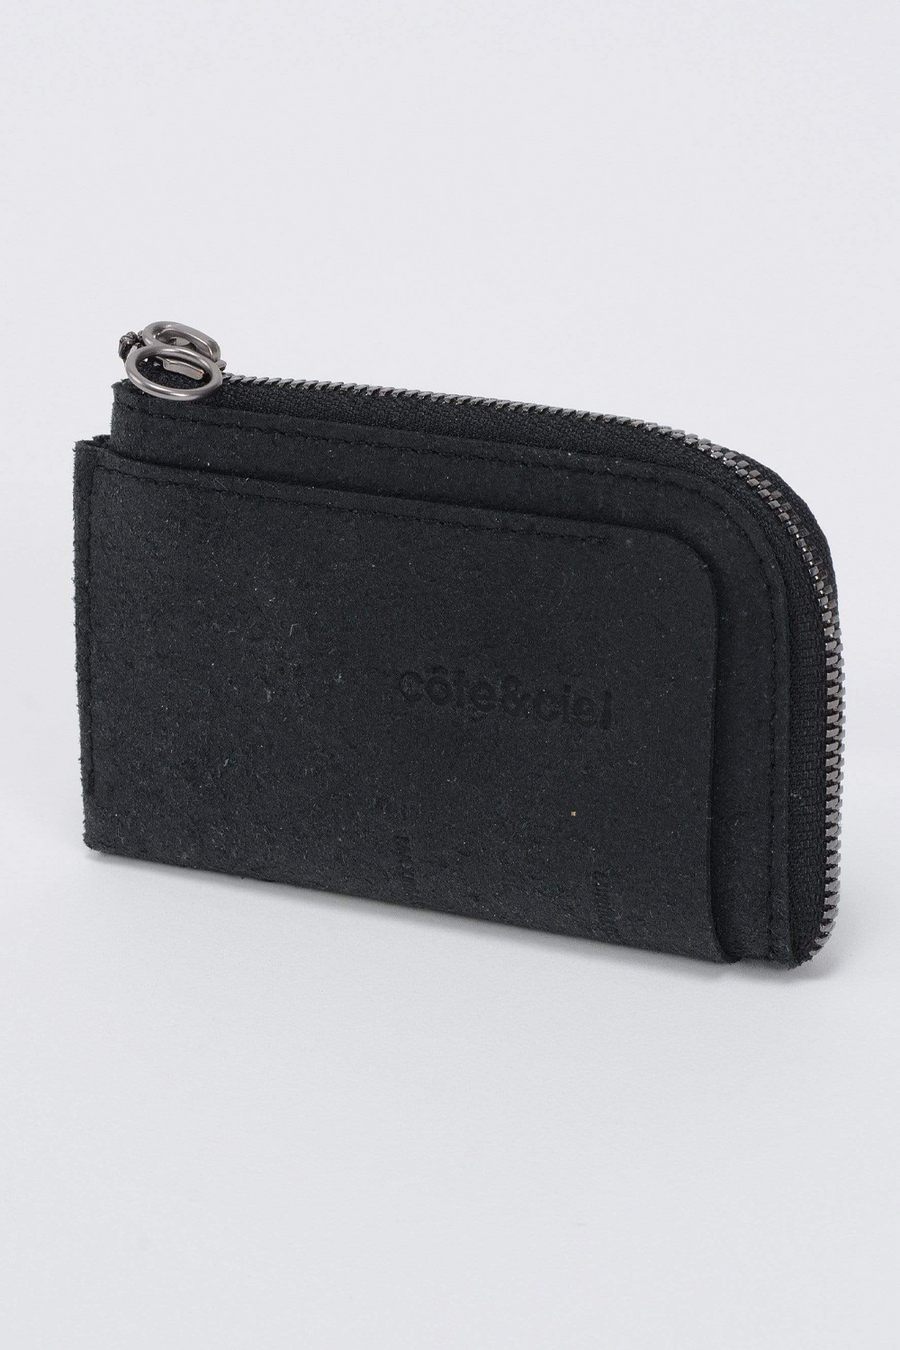 Buy the Cote & Ciel Zippered Wallet Recycled Leather in Black at Intro. Spend £50 for free UK delivery. Official stockists. We ship worldwide.